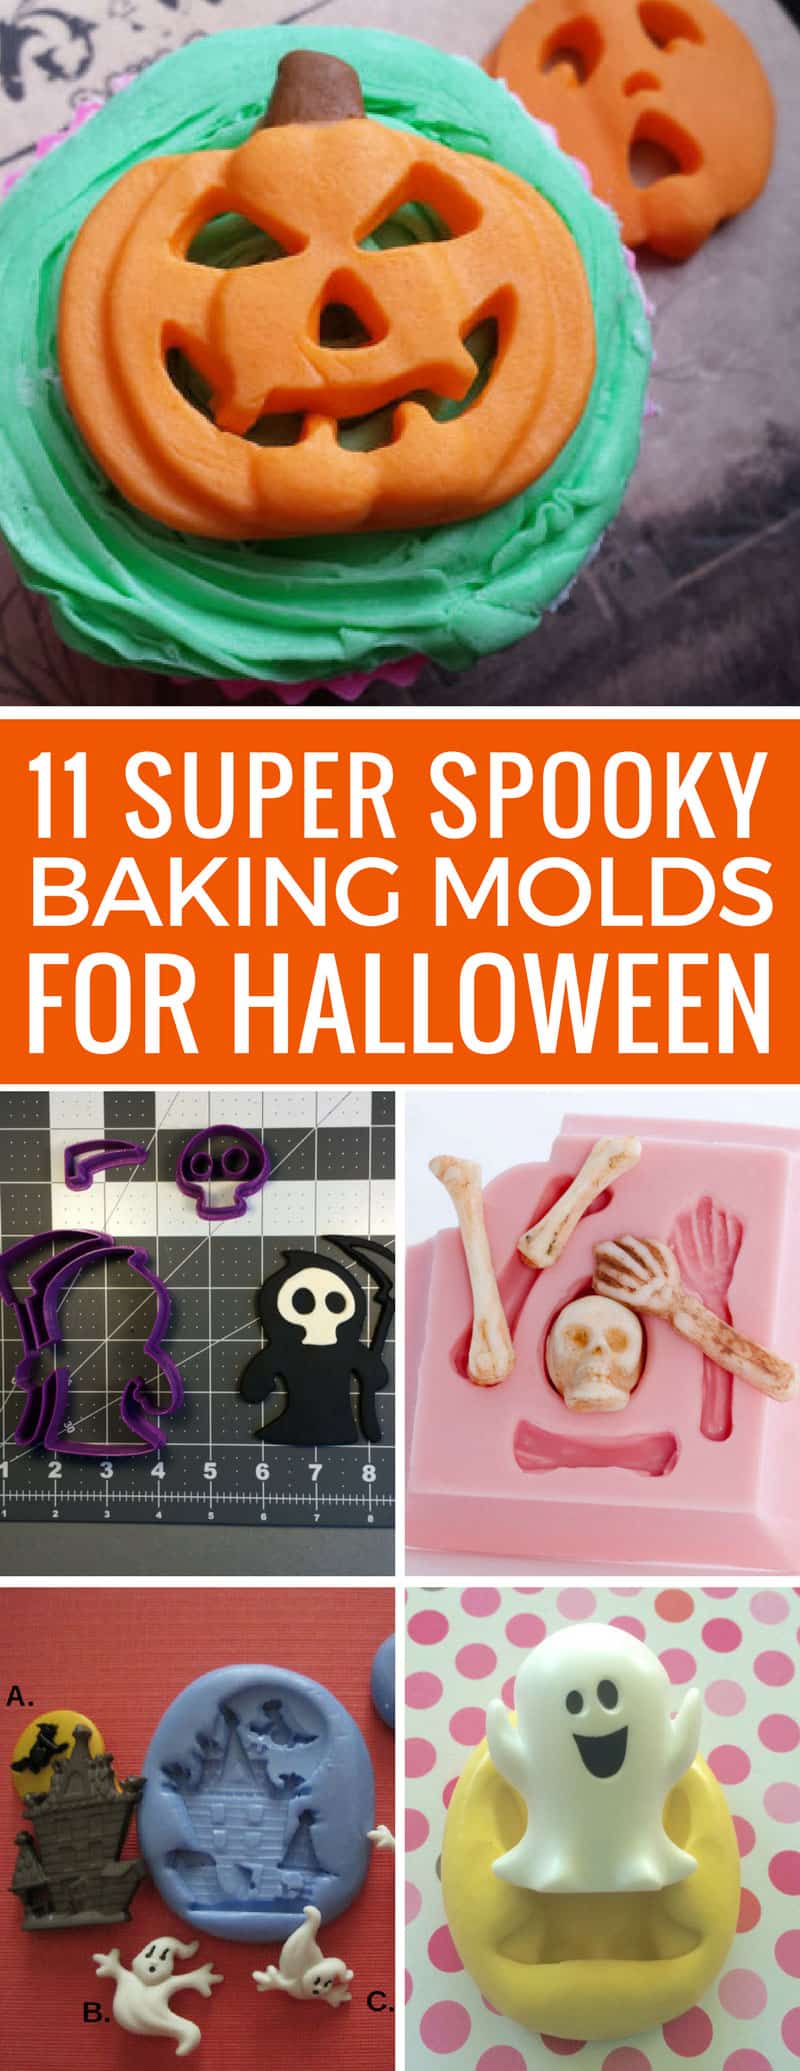 Wow - Loving these Halloween baking molds! Can't wait to start baking treats now! Thanks for sharing!